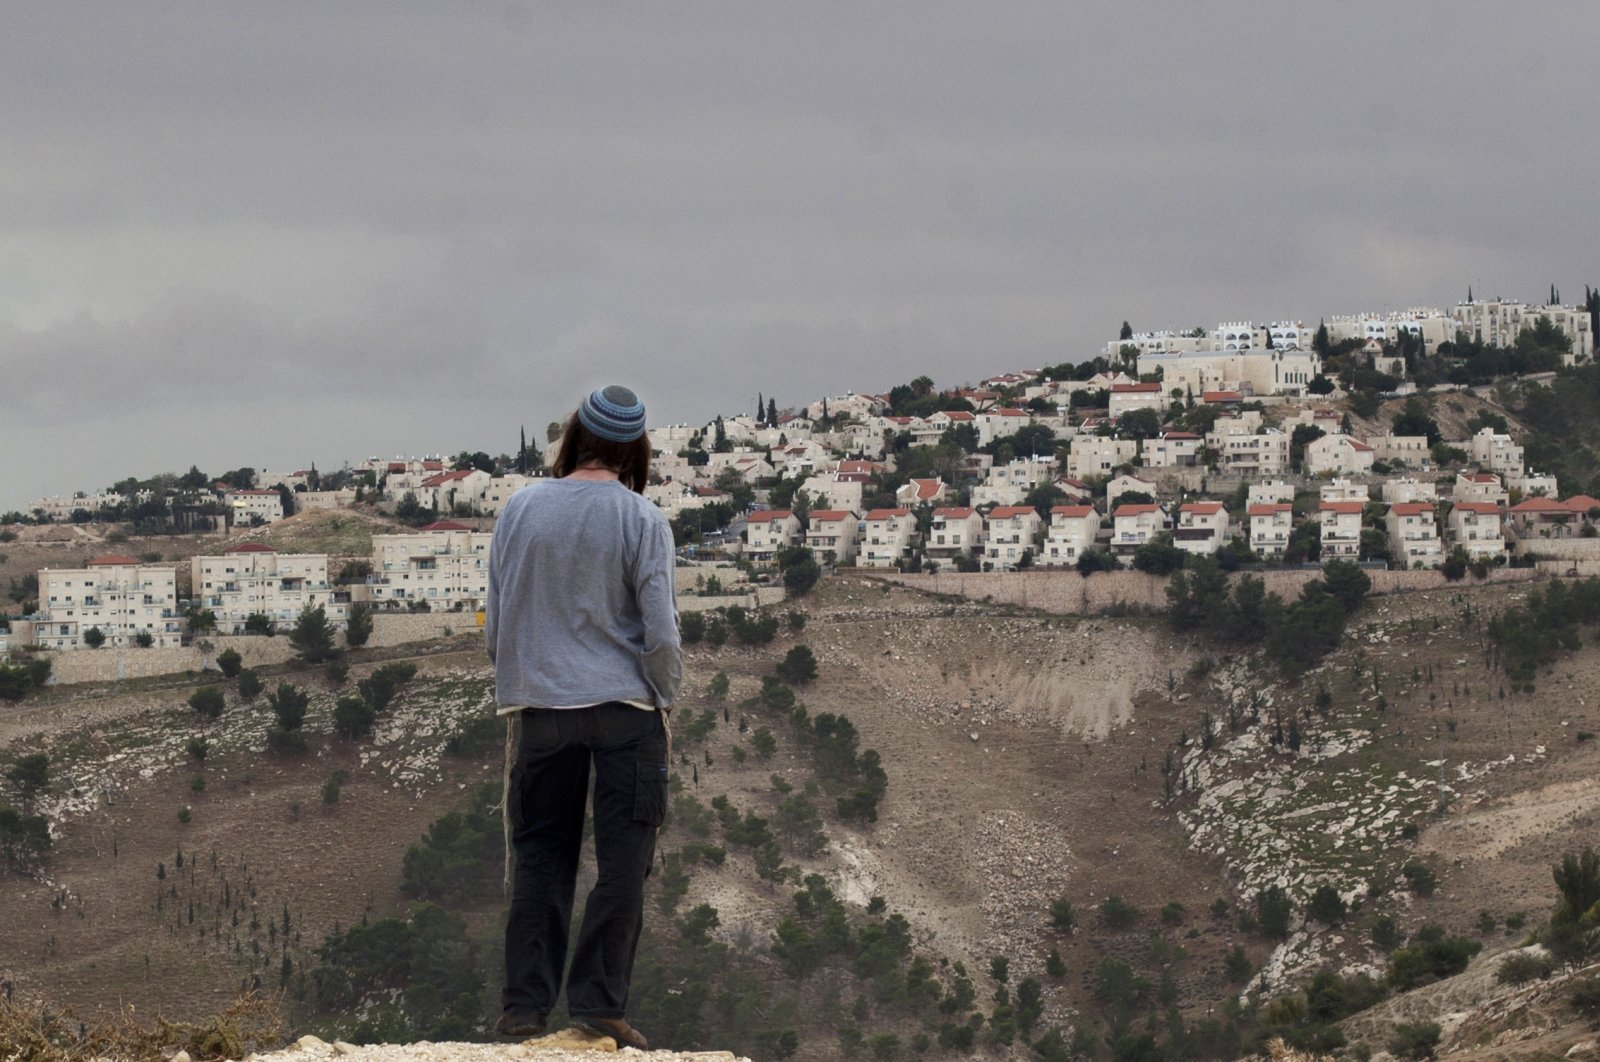 A Jewish settler looks at the West Bank settlement of Maaleh Adumim, from the E-1 area on the eastern outskirts of Jerusalem, occupied Palestine, Dec. 5, 2012. (AP Photo)